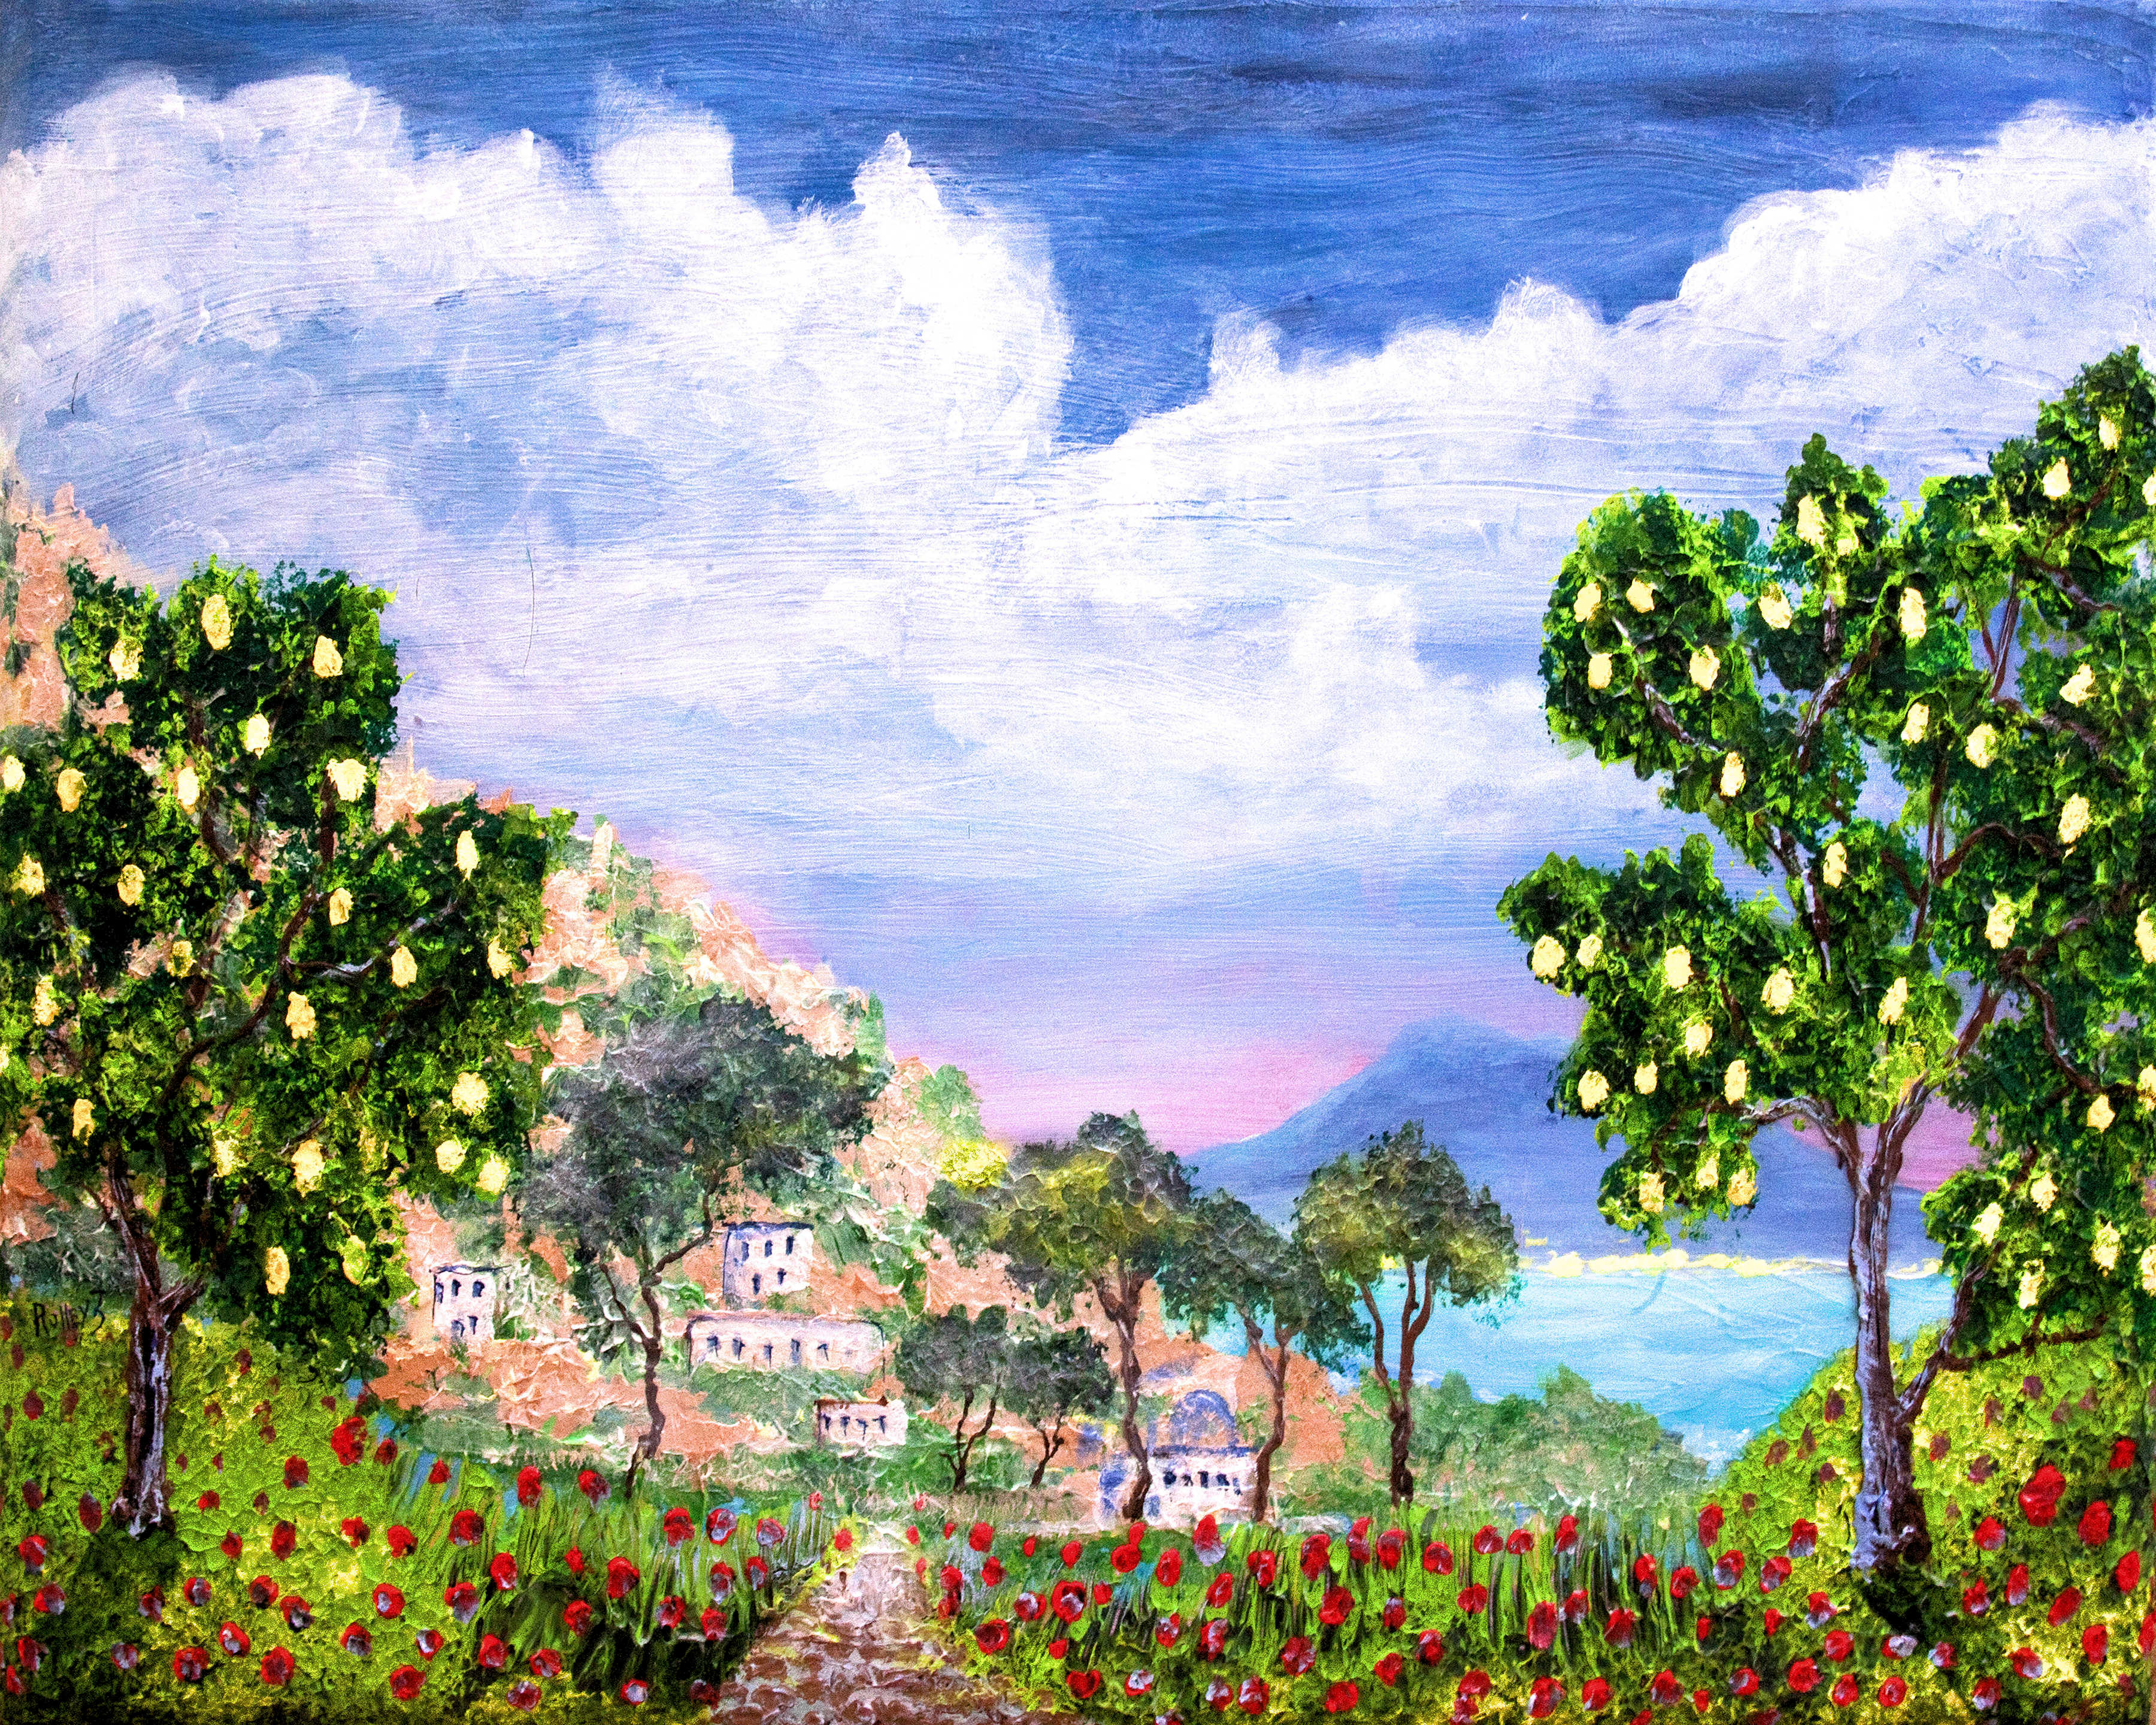 BEGINING OF AMALFI (WITH NAPLES AND VESUVIUS   30X40" $1000 HIGHLIGHTED WITH GLOW IN DARK LUMINESCENT PAINT